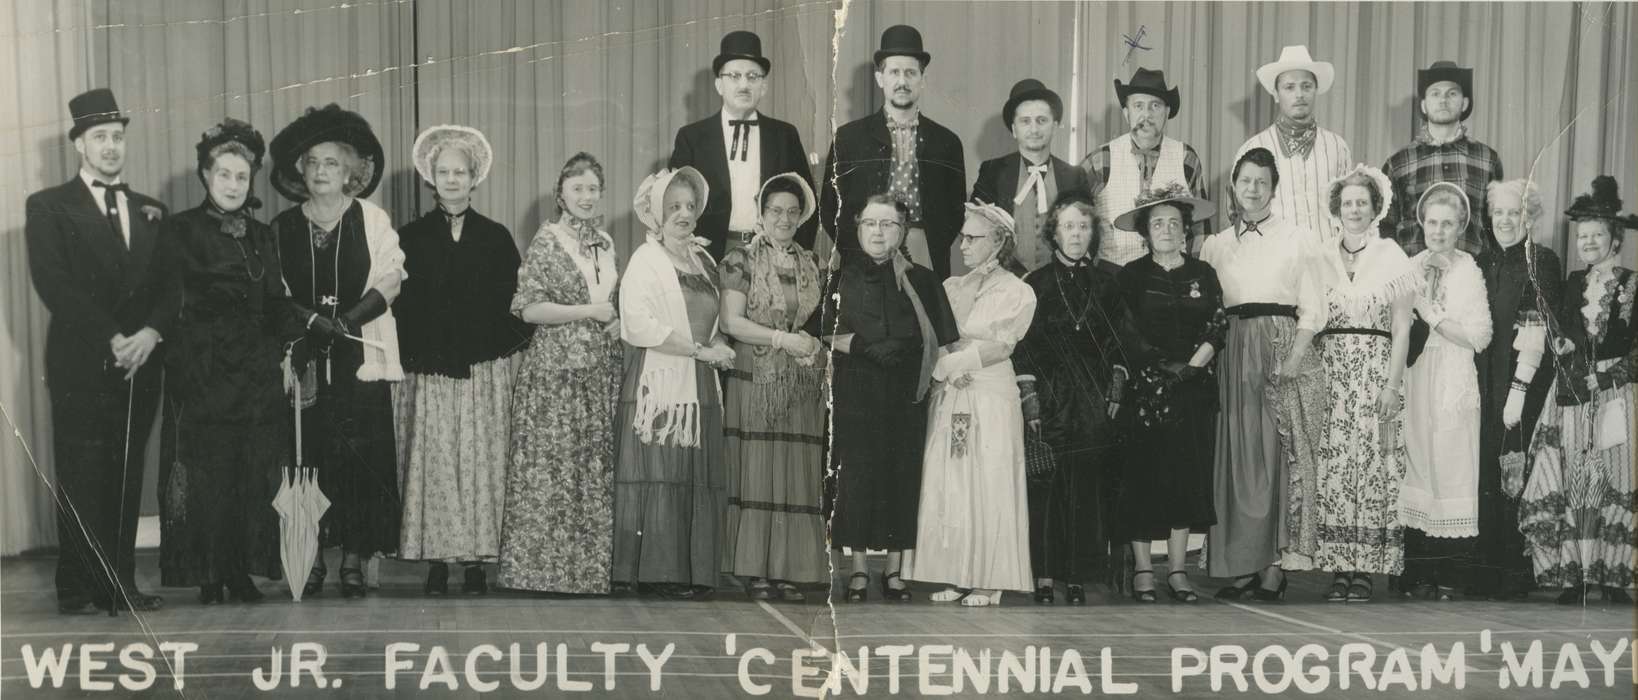 Iowa, Schools and Education, Portraits - Group, stage, play, cowboy hat, umbrella, Entertainment, Iowa History, history of Iowa, performance, Rossiter, Lynn, Sioux City, IA